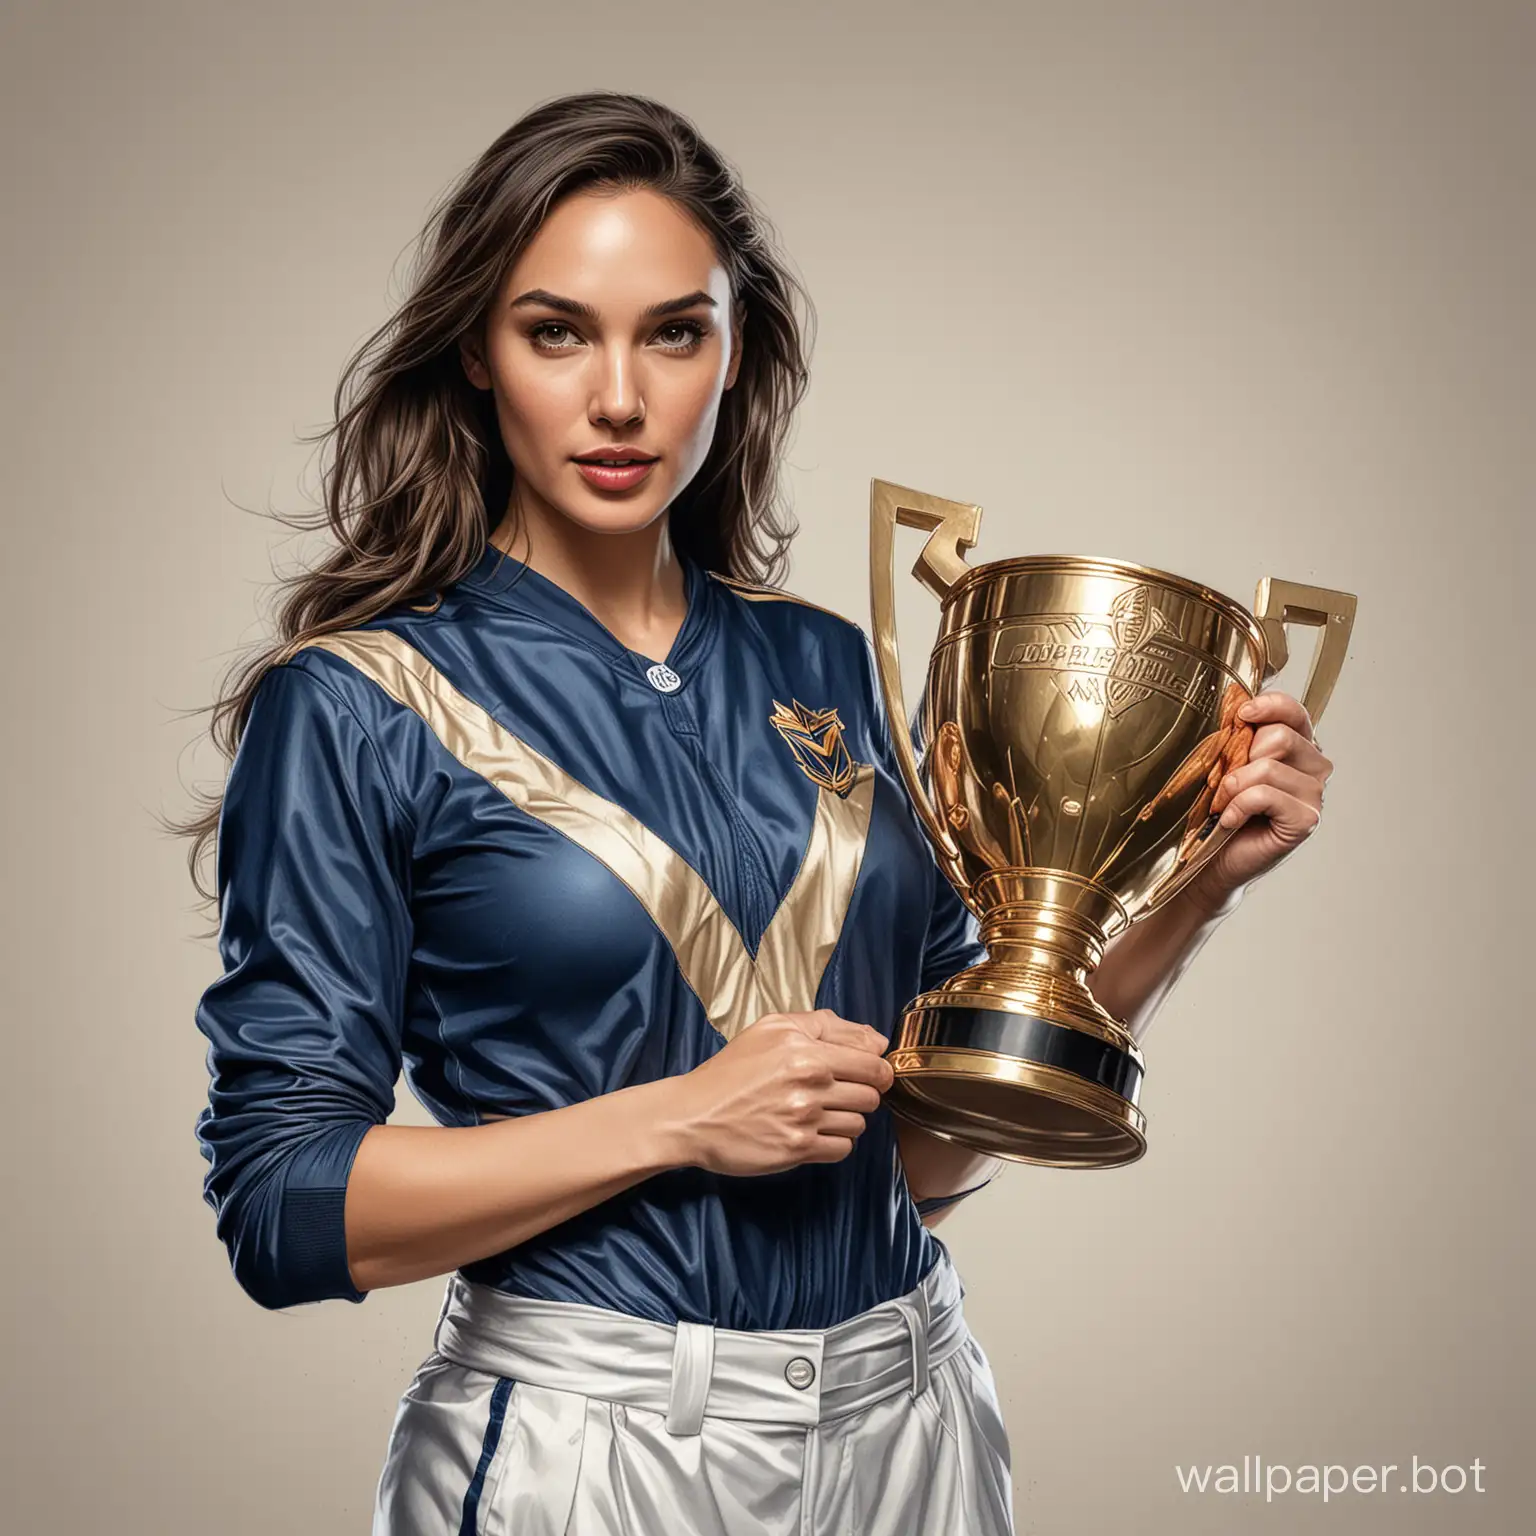 sketch Gal Gadot 26 years old dark long hair size 4 breast narrow waist in dark blue-beige football uniform holding a large champions cup white background high realism drawing with colored markers blur at the bottom